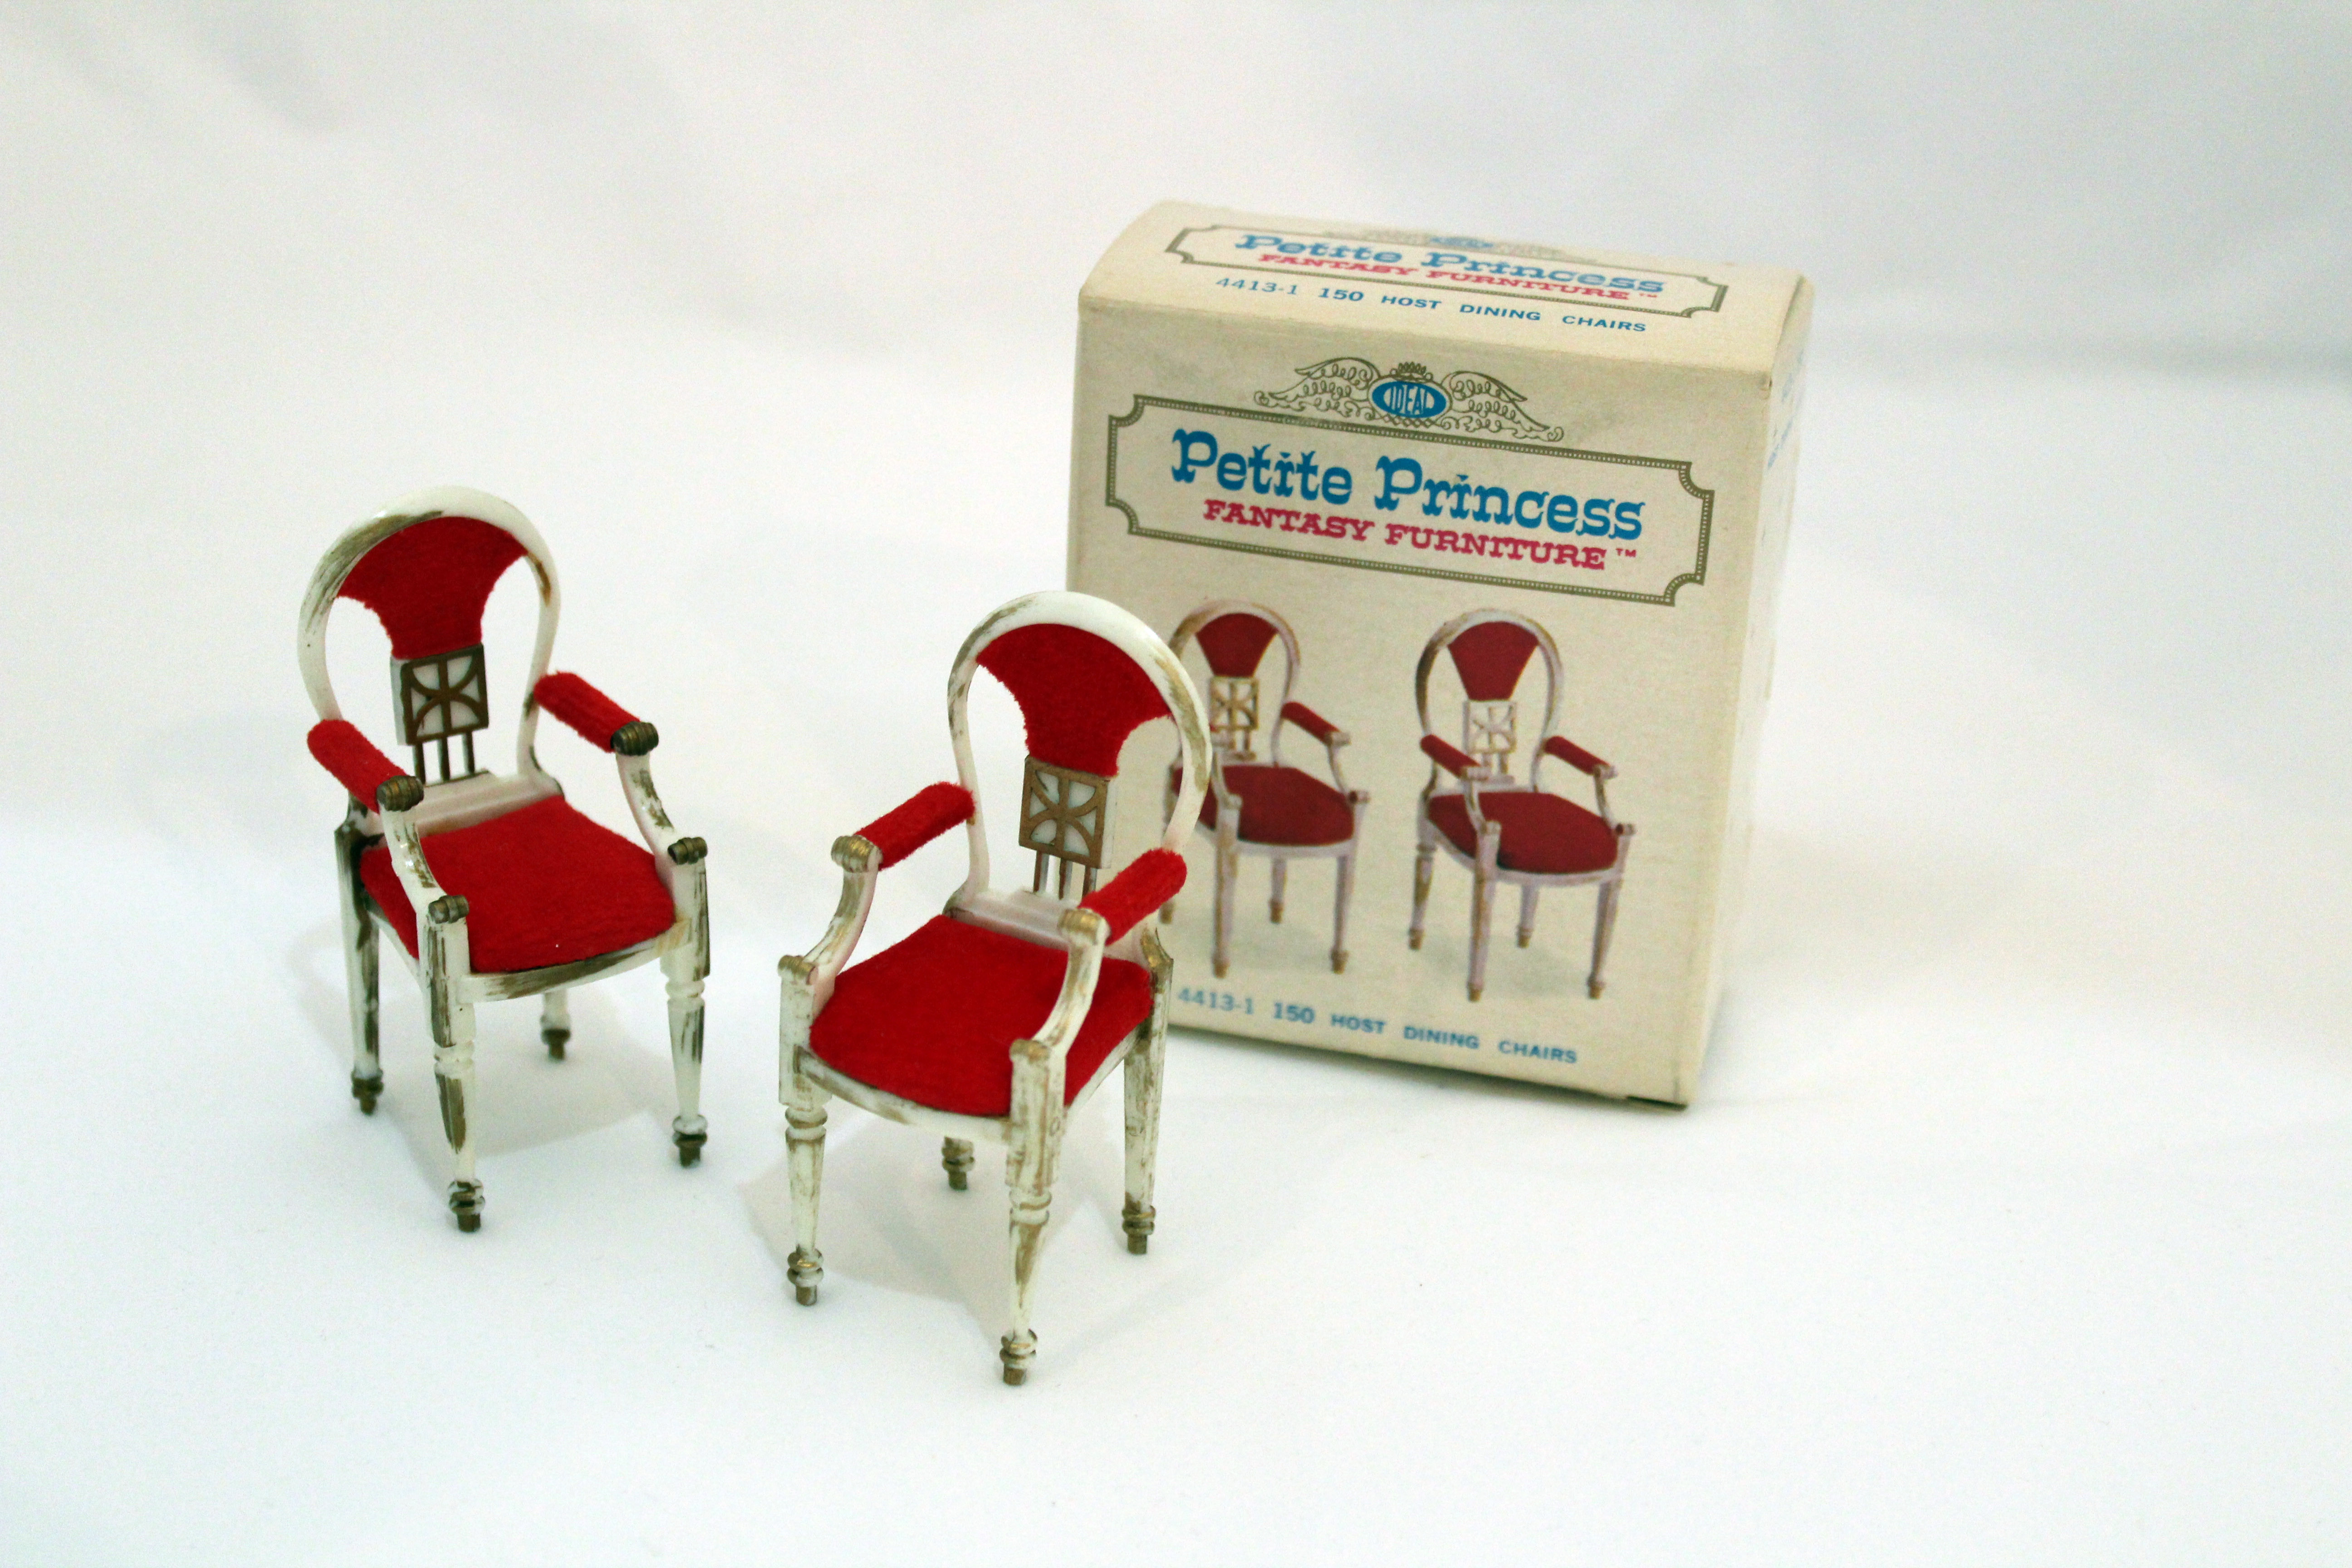 IDEAL Petite Princess Fantasy Doll Furniture Guest Dining Chair White Red Seat 